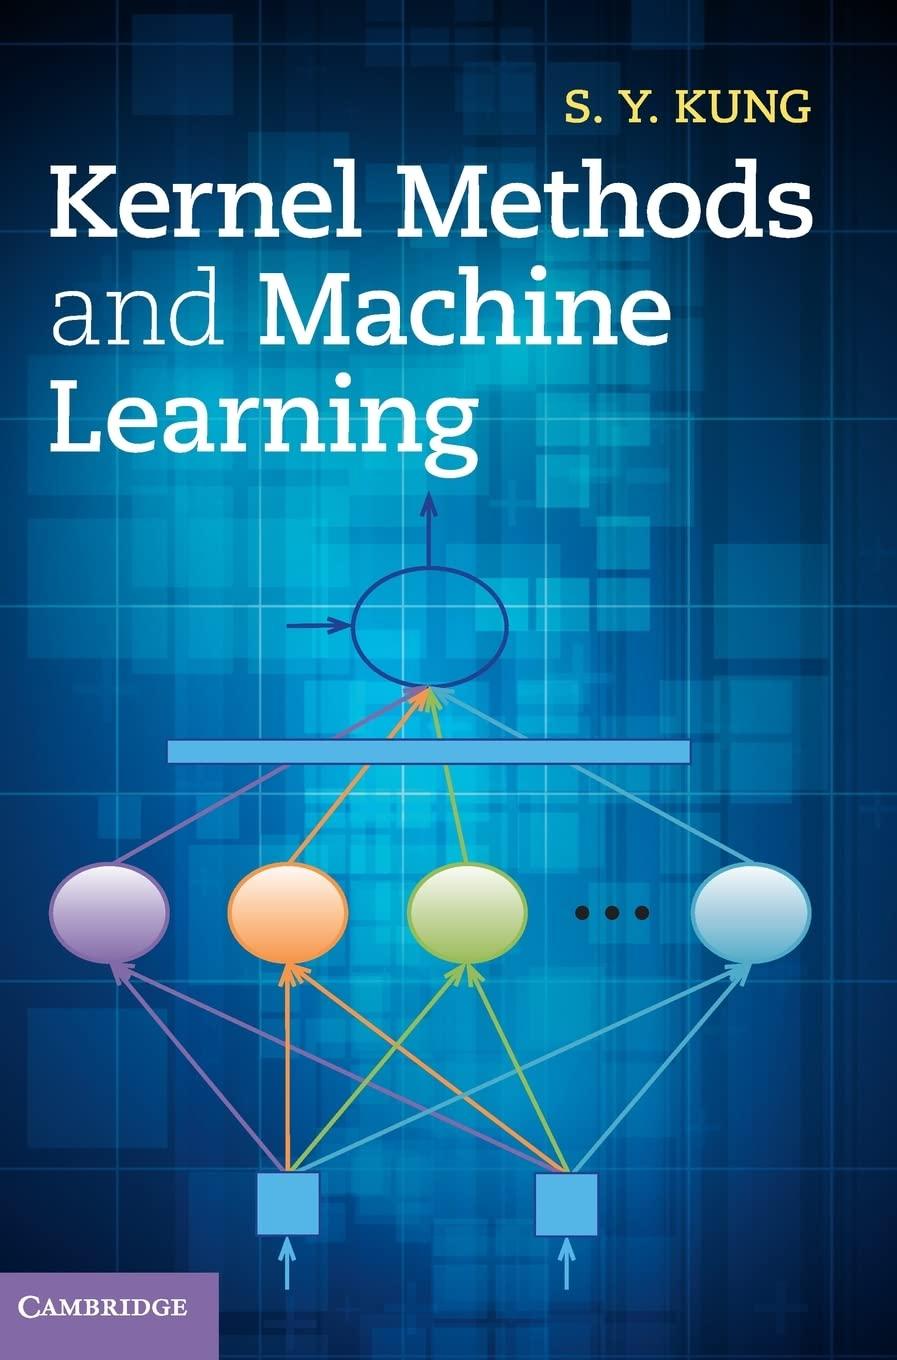 kernel methods and machine learning 1st edition s. y. kung 110702496x, 978-1107024960